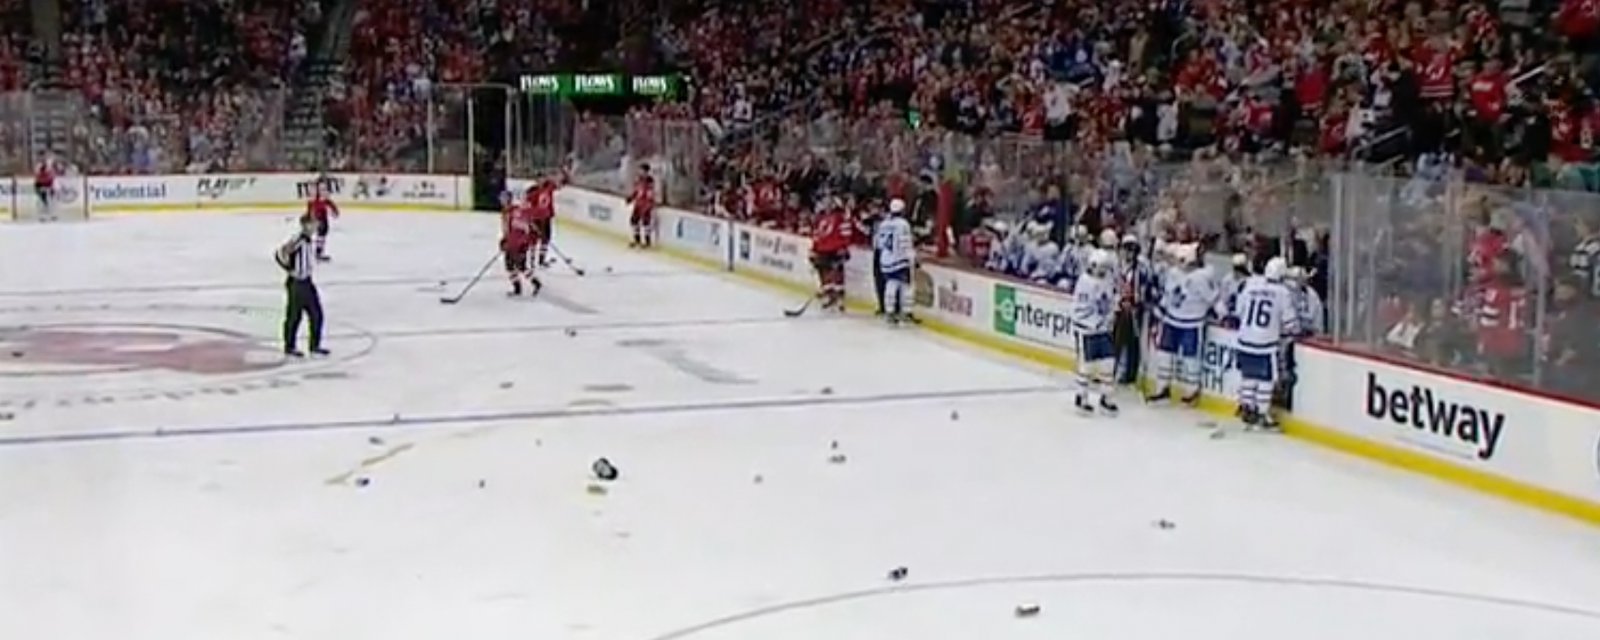 Leafs’ players get hit by garbage thrown on the ice in New Jersey!